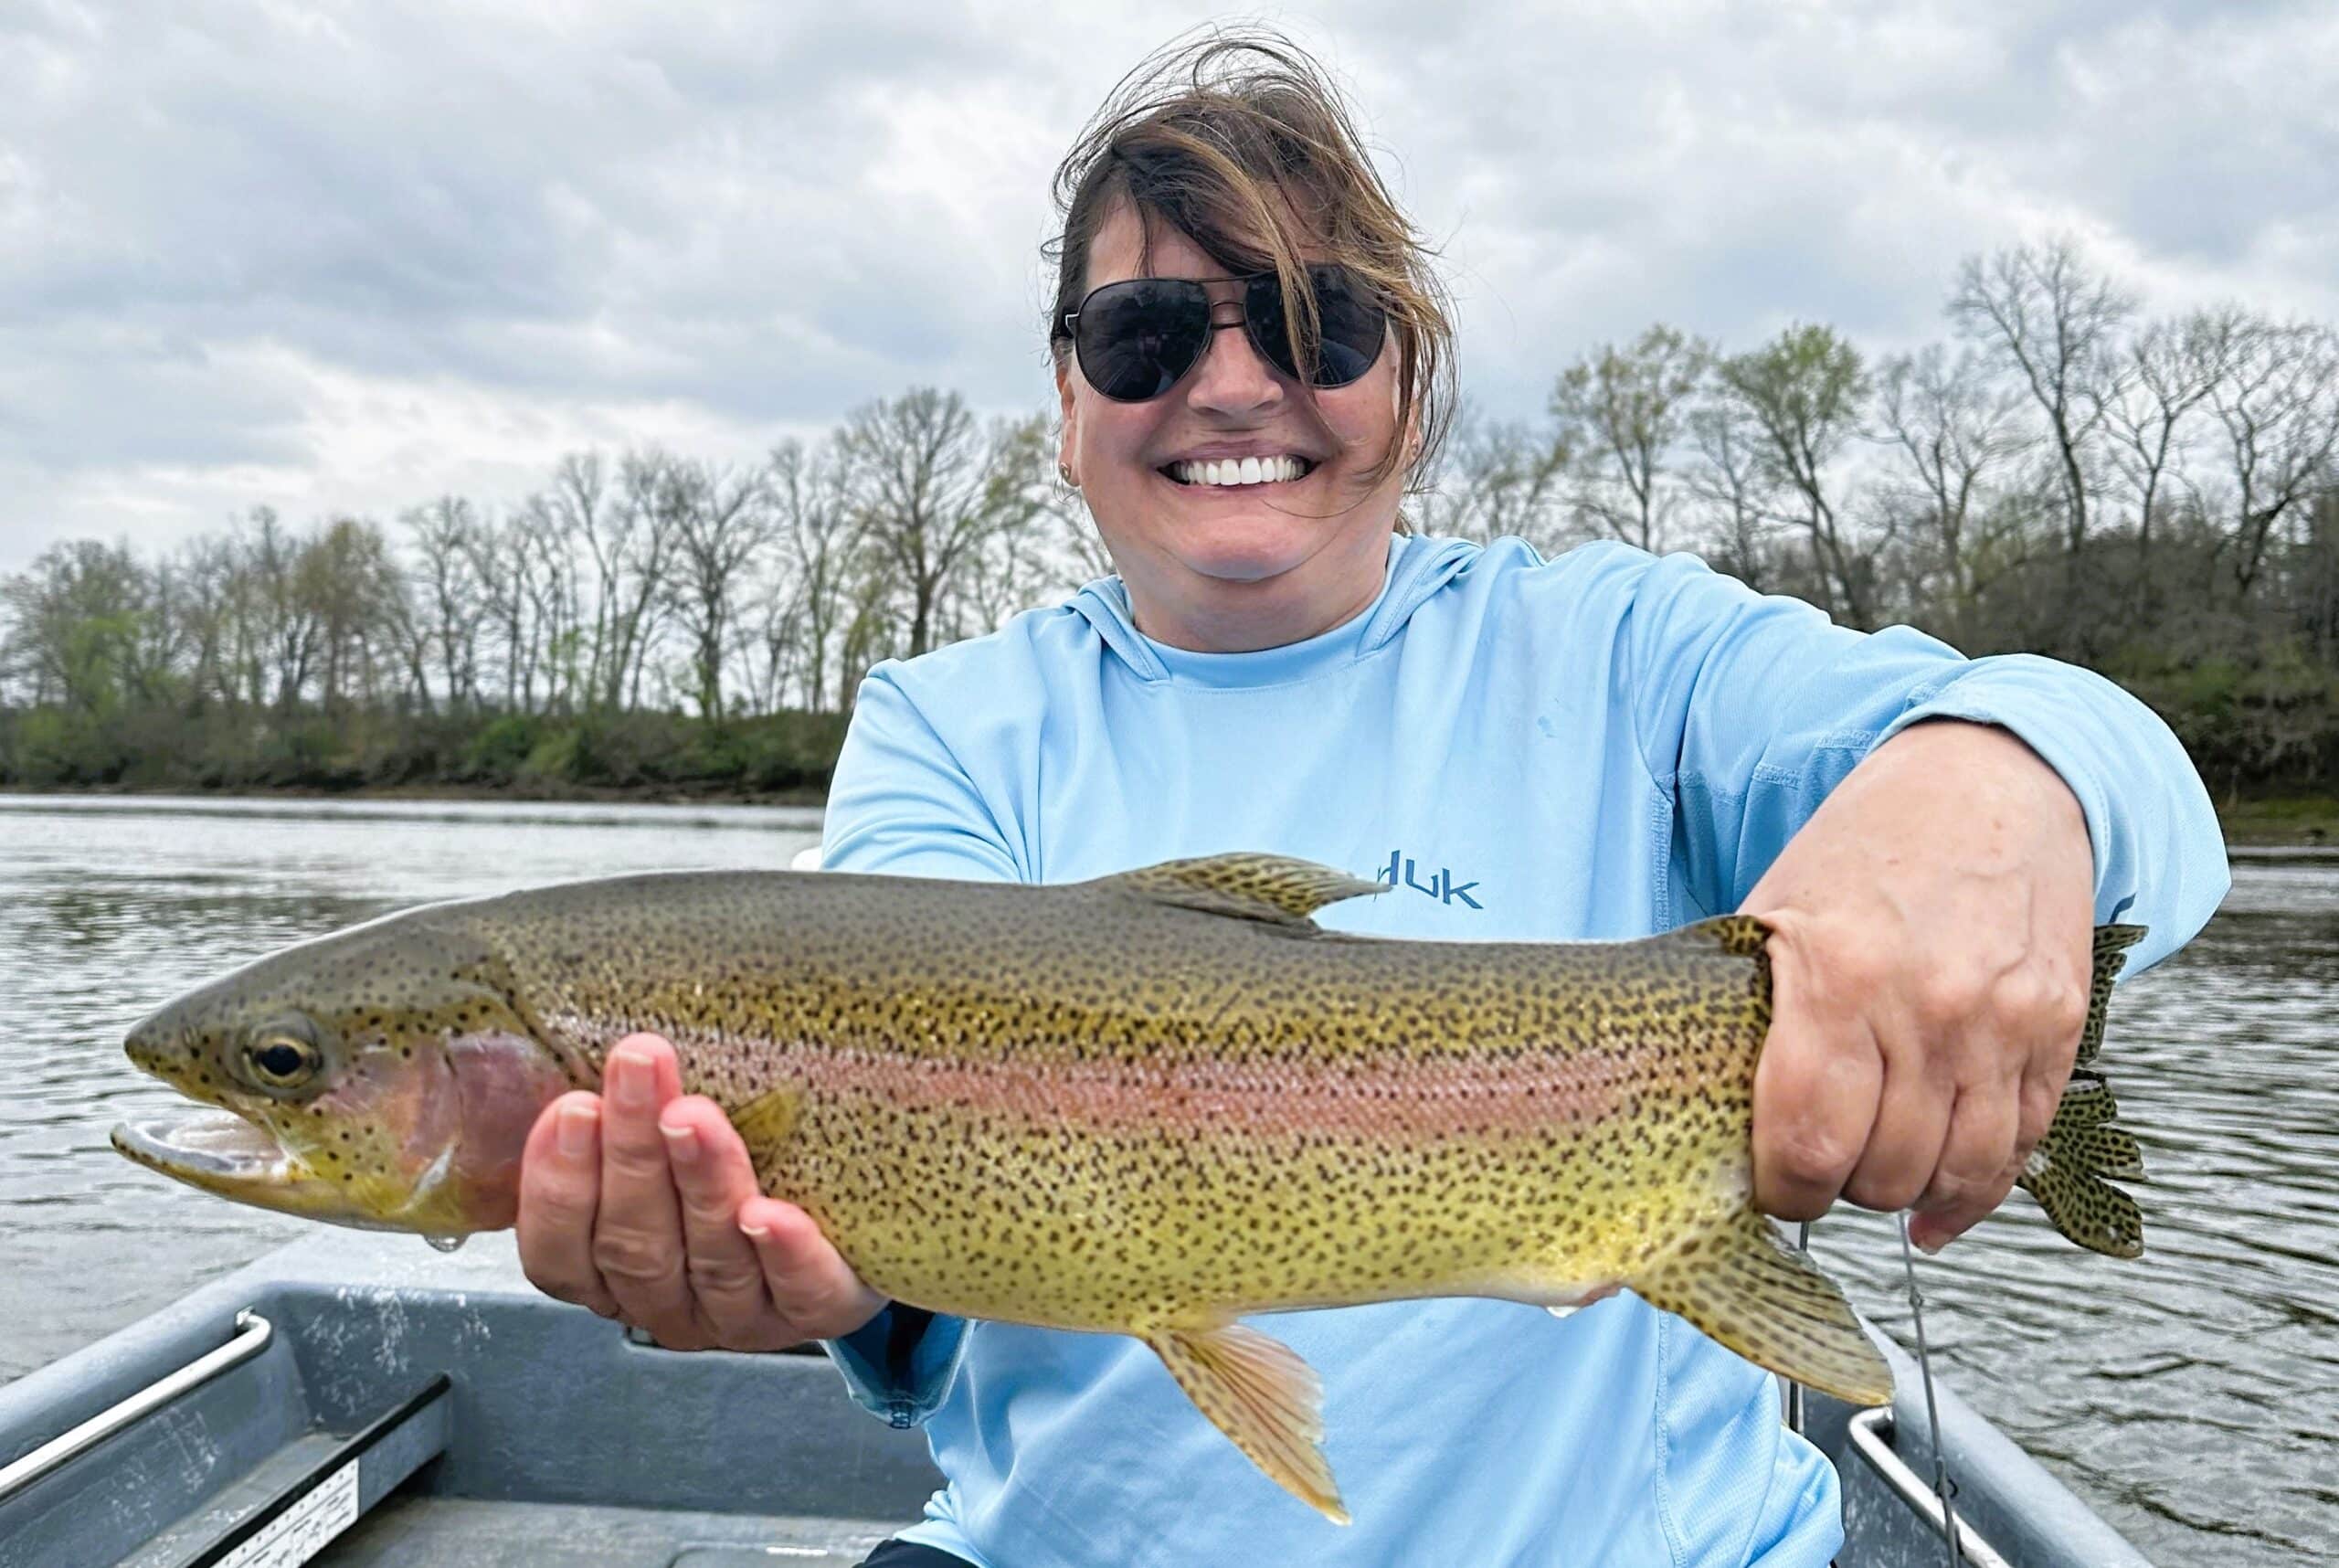 Fishing reports, best baits and forecast for fishing in Scott Creek